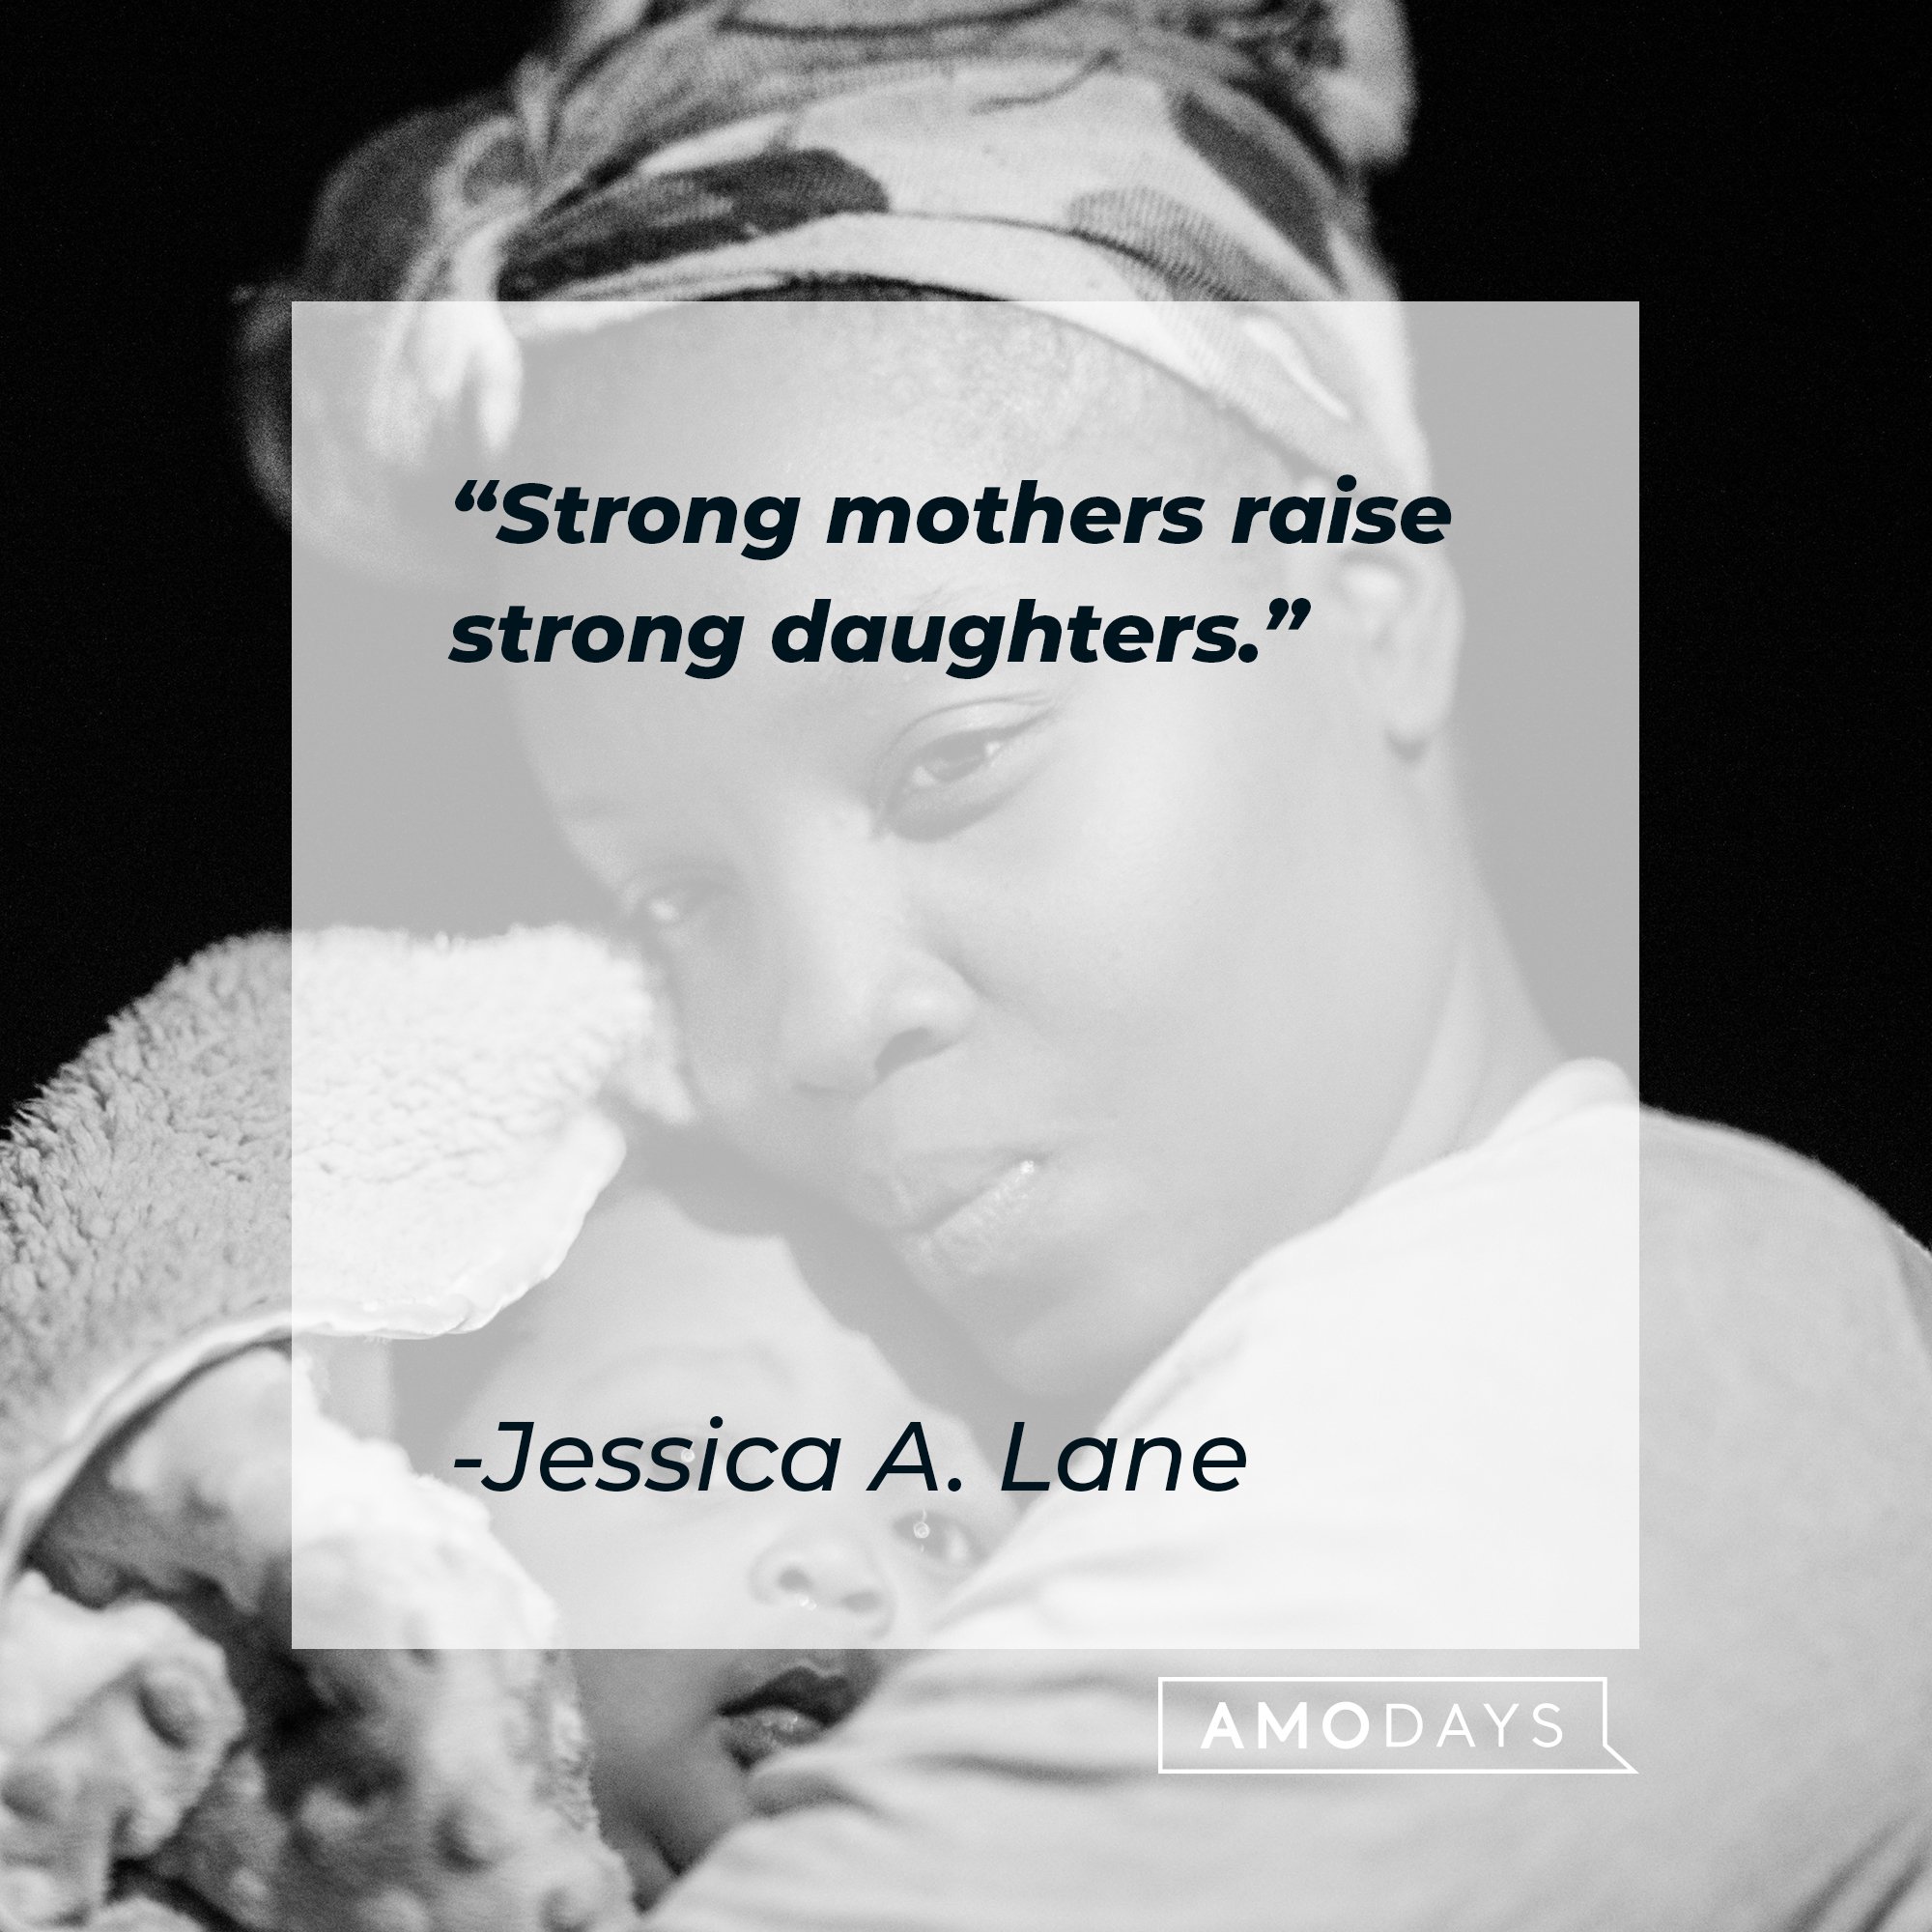 Jessica A. Lane's quote: "Strong mothers raise strong daughters." | Image: AmoDays